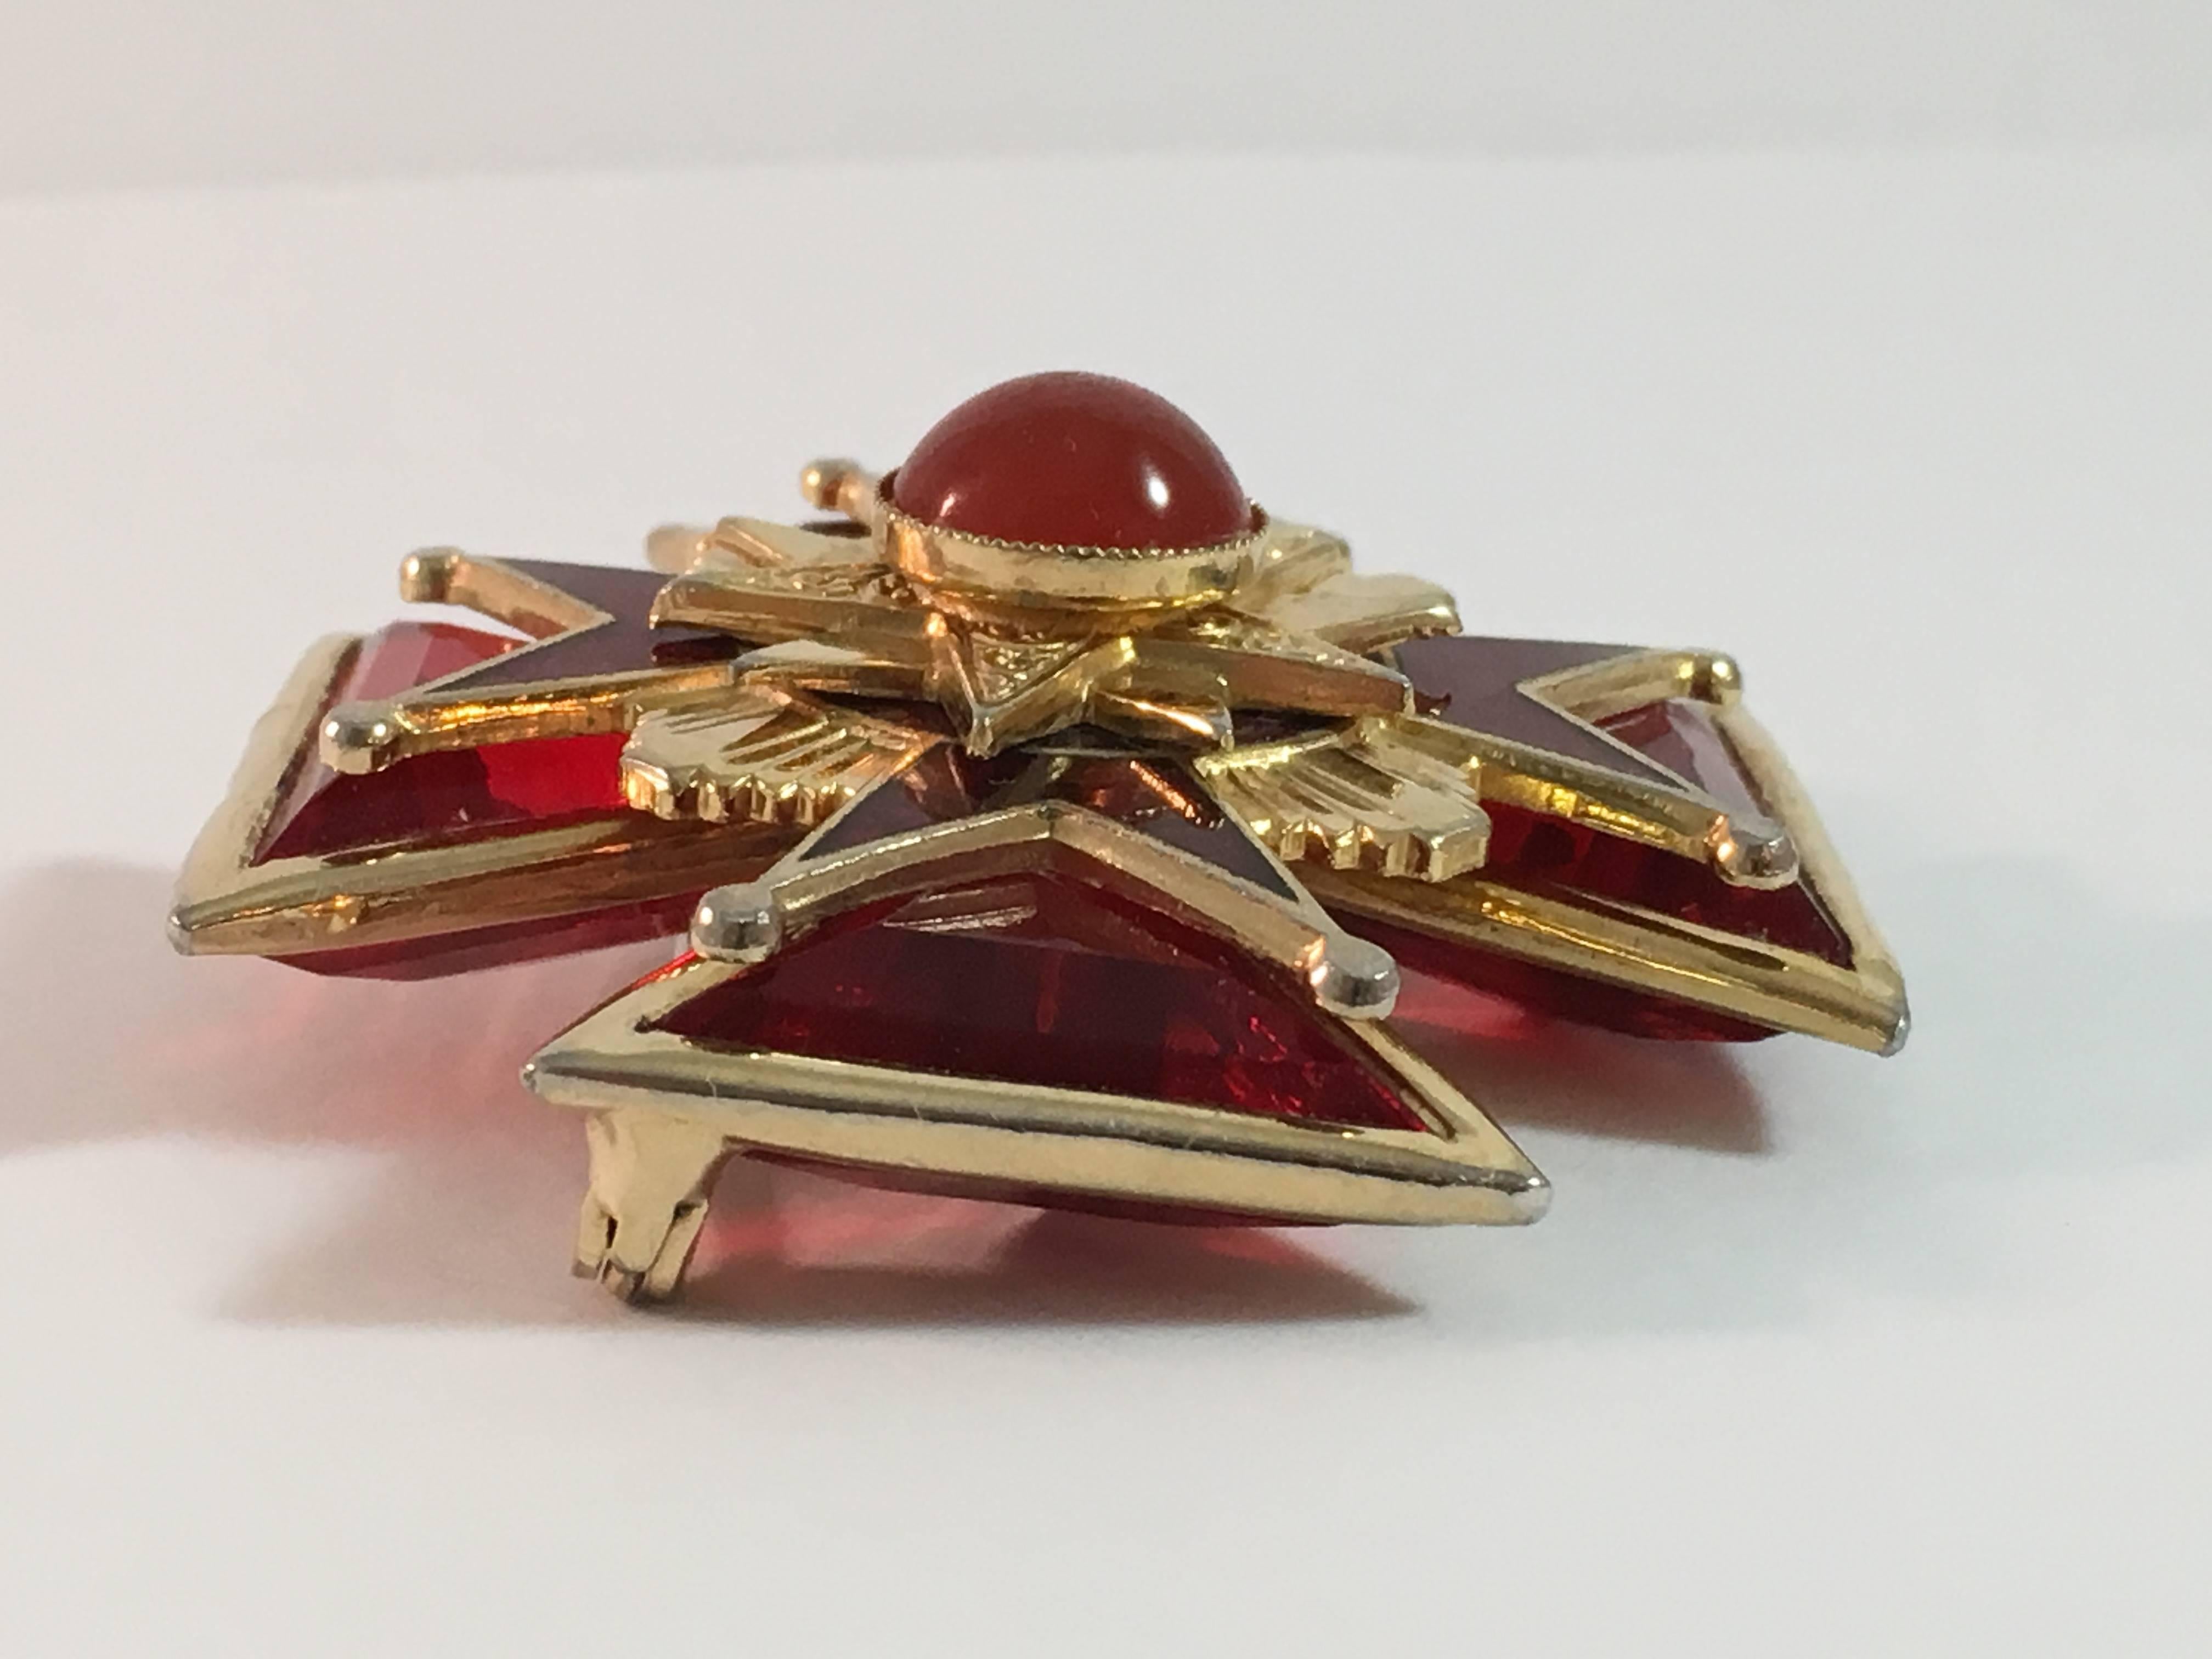 This is a 1960s red glass maltese cross brooch. It is in excellent condition and measures 1 3/4